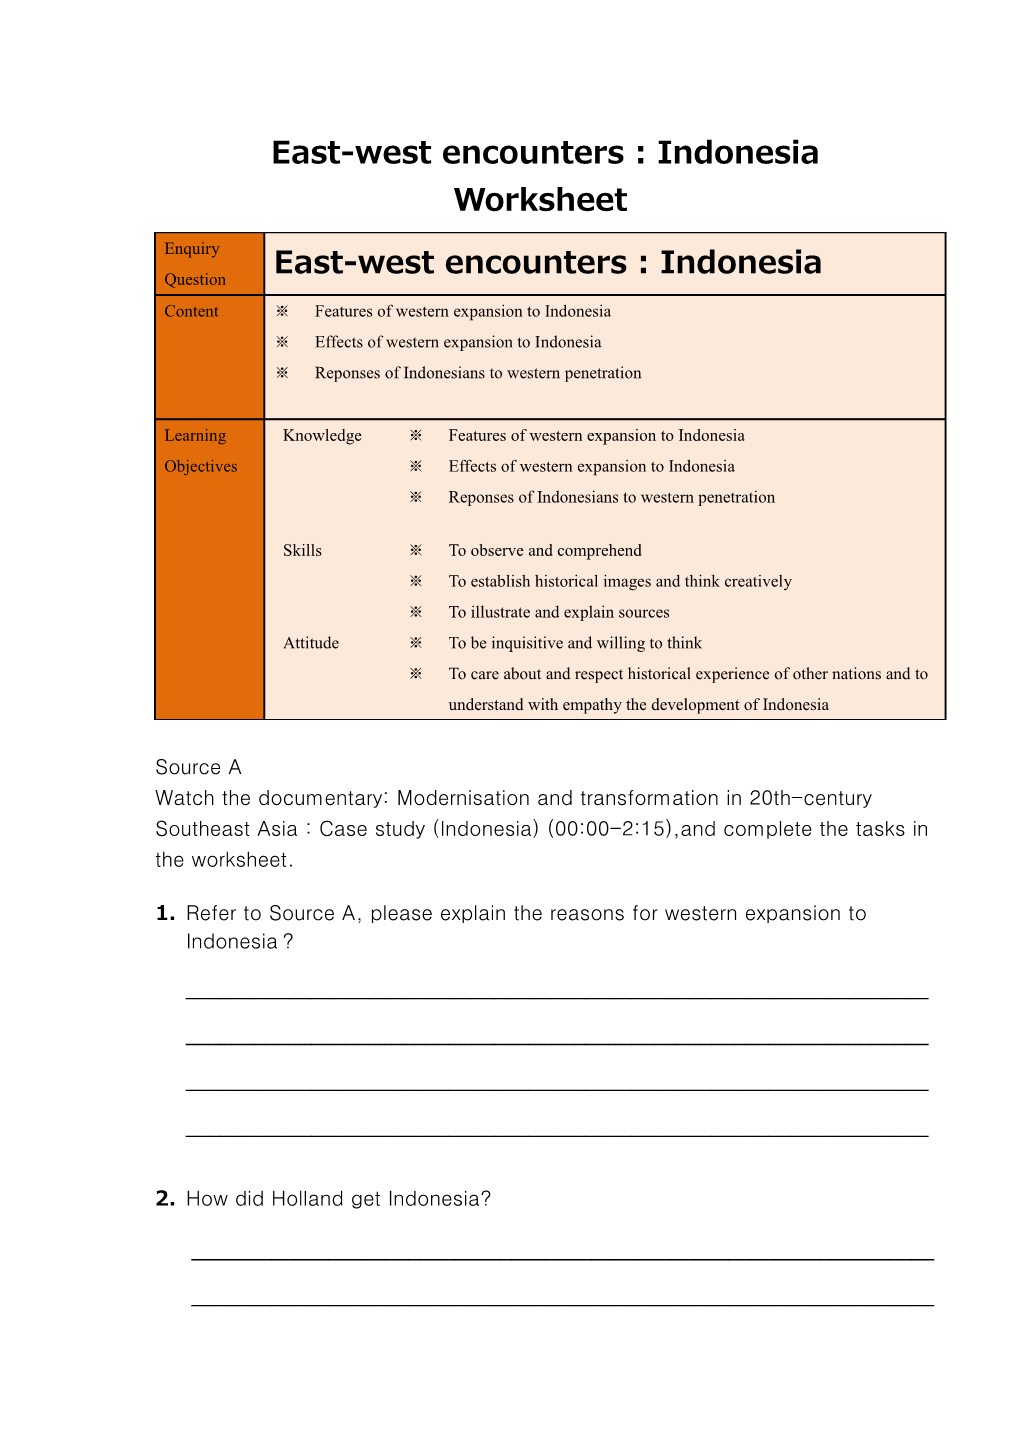 East-West Encounters : Indonesia